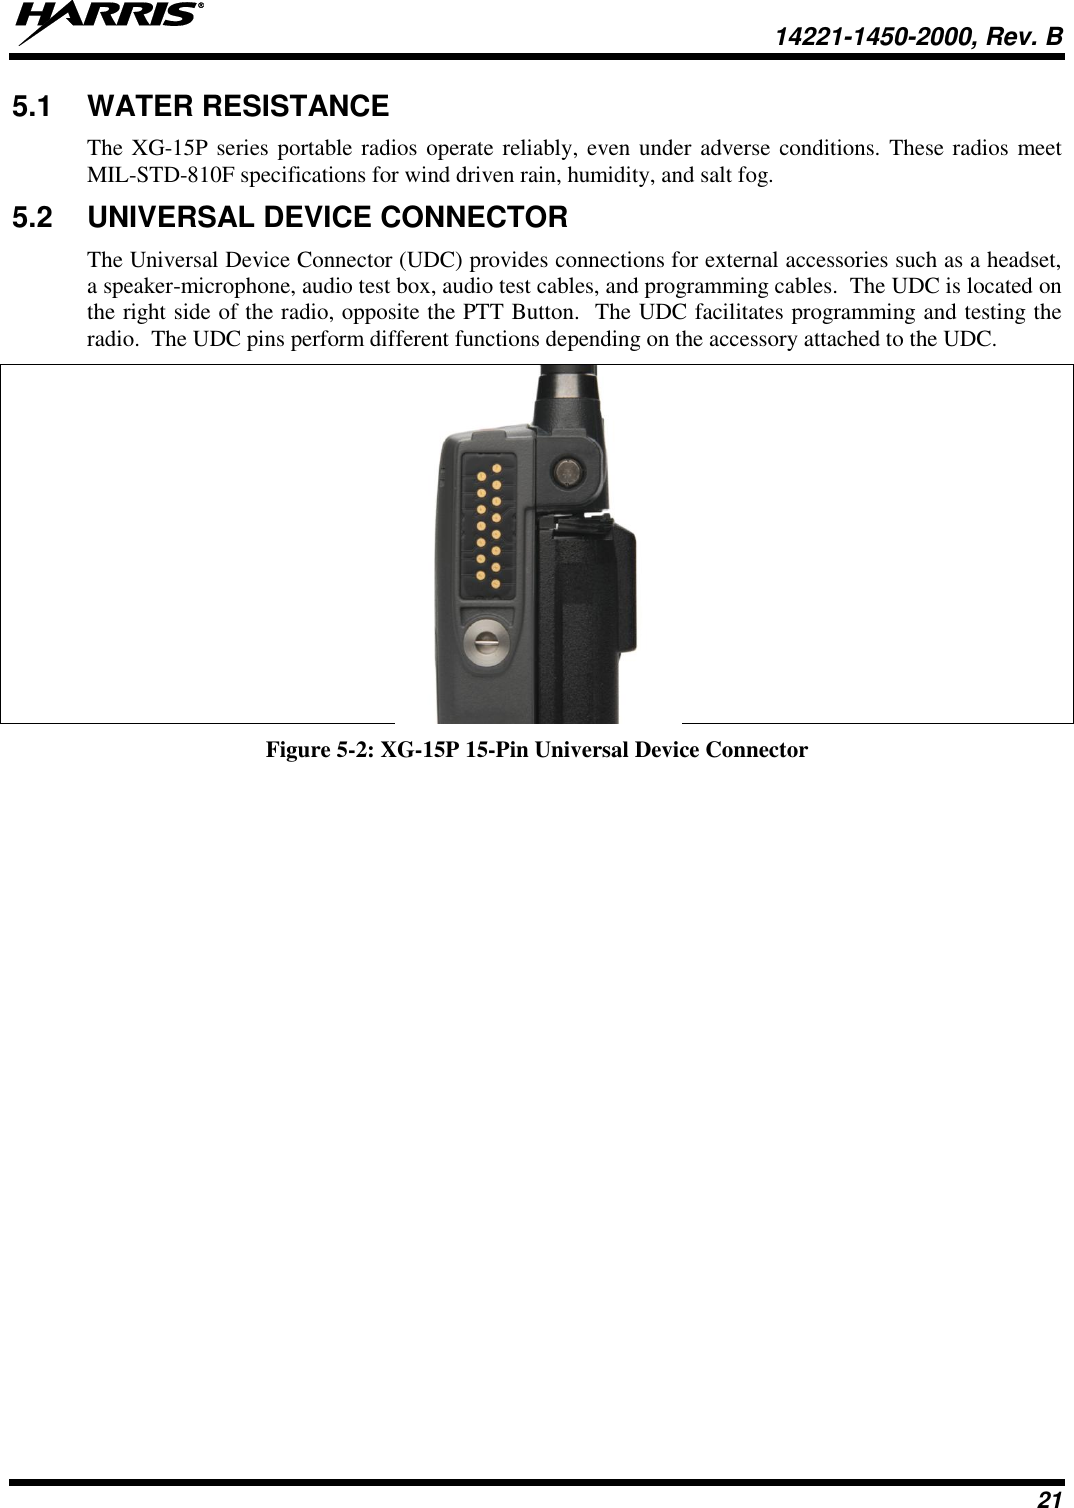   14221-1450-2000, Rev. B 21 5.1  WATER RESISTANCE The XG-15P series portable radios operate reliably, even under adverse conditions. These radios meet MIL-STD-810F specifications for wind driven rain, humidity, and salt fog.  5.2  UNIVERSAL DEVICE CONNECTOR The Universal Device Connector (UDC) provides connections for external accessories such as a headset, a speaker-microphone, audio test box, audio test cables, and programming cables.  The UDC is located on the right side of the radio, opposite the PTT Button.  The UDC facilitates programming and testing the radio.  The UDC pins perform different functions depending on the accessory attached to the UDC.    Figure 5-2: XG-15P 15-Pin Universal Device Connector 